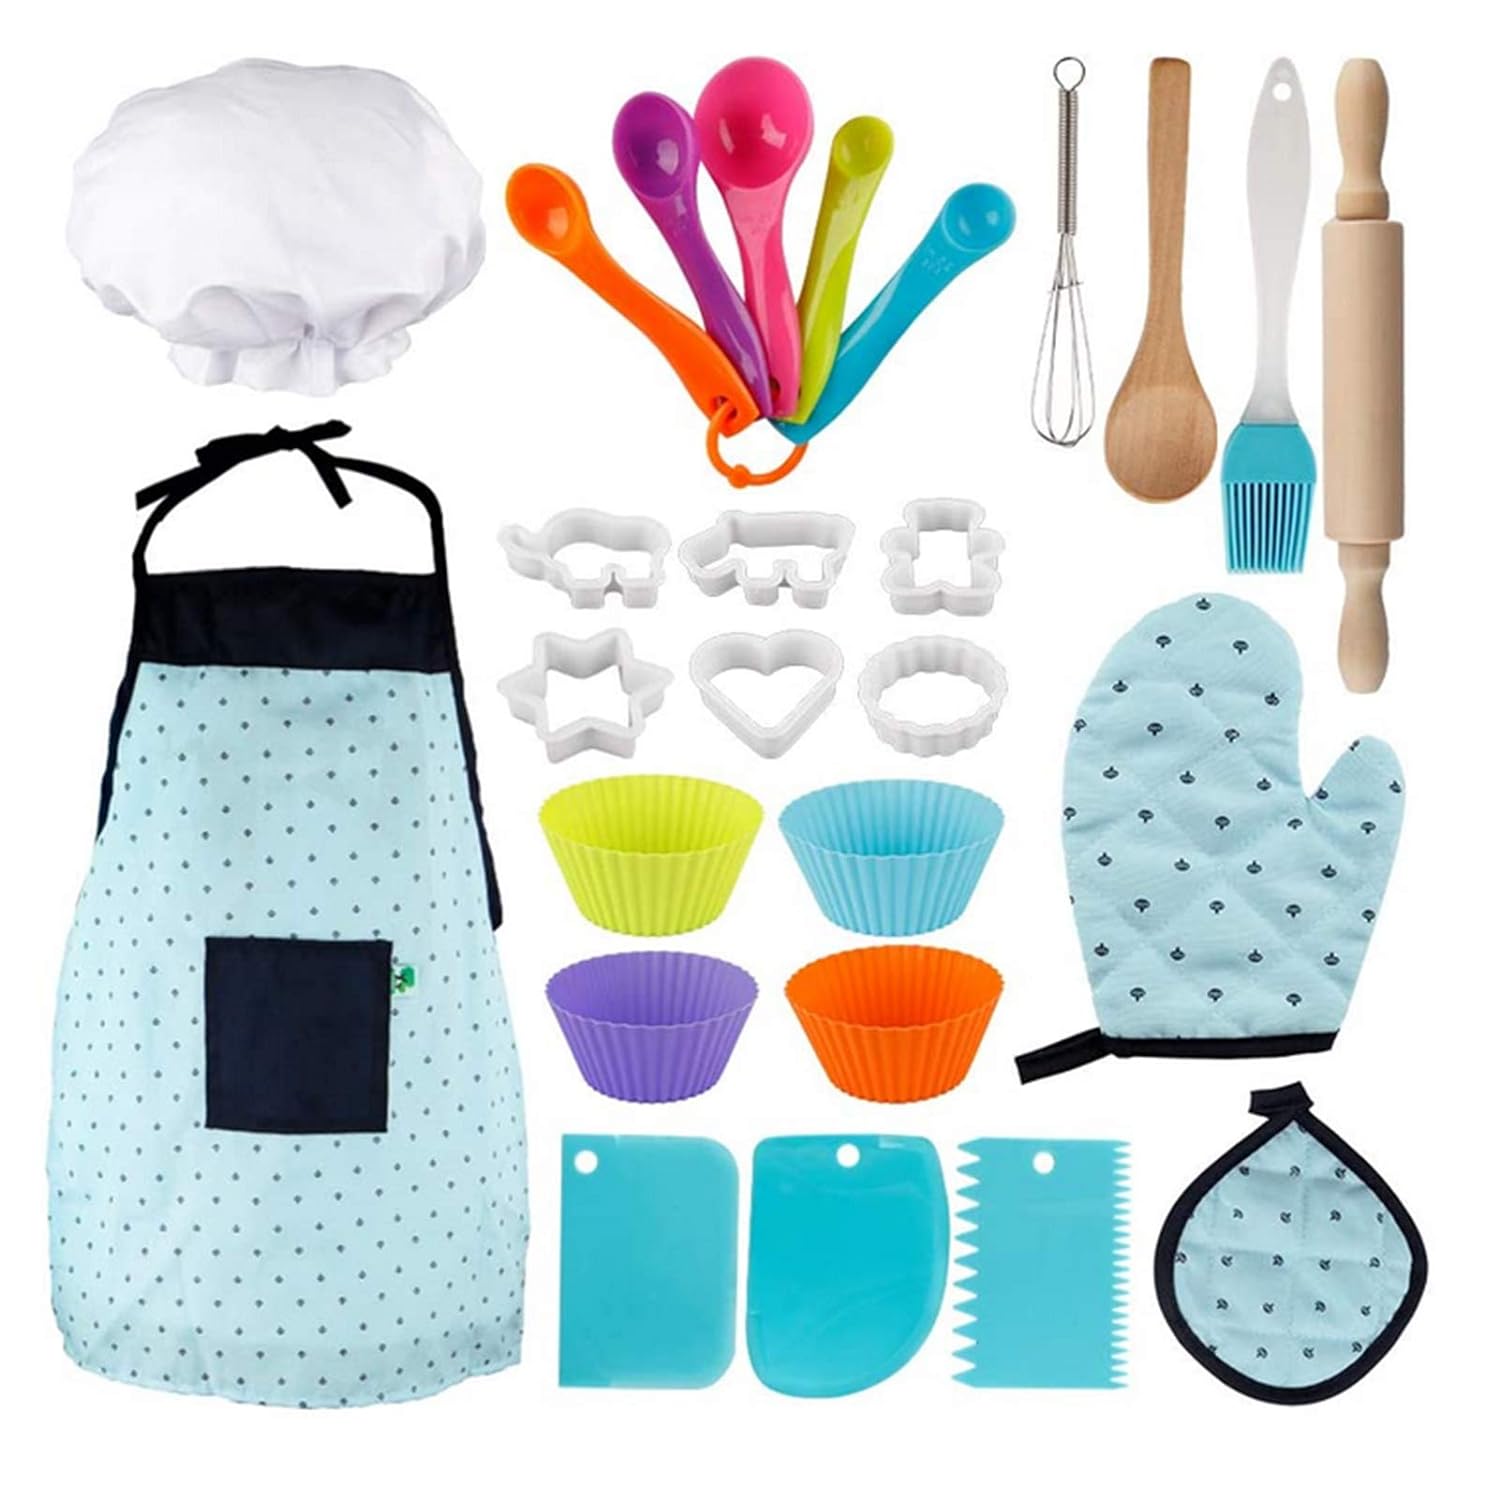 F FABOBJECTS® 26PCS Child Cosplay Baking Cooking Home Kitchen Apron Cake Accessories